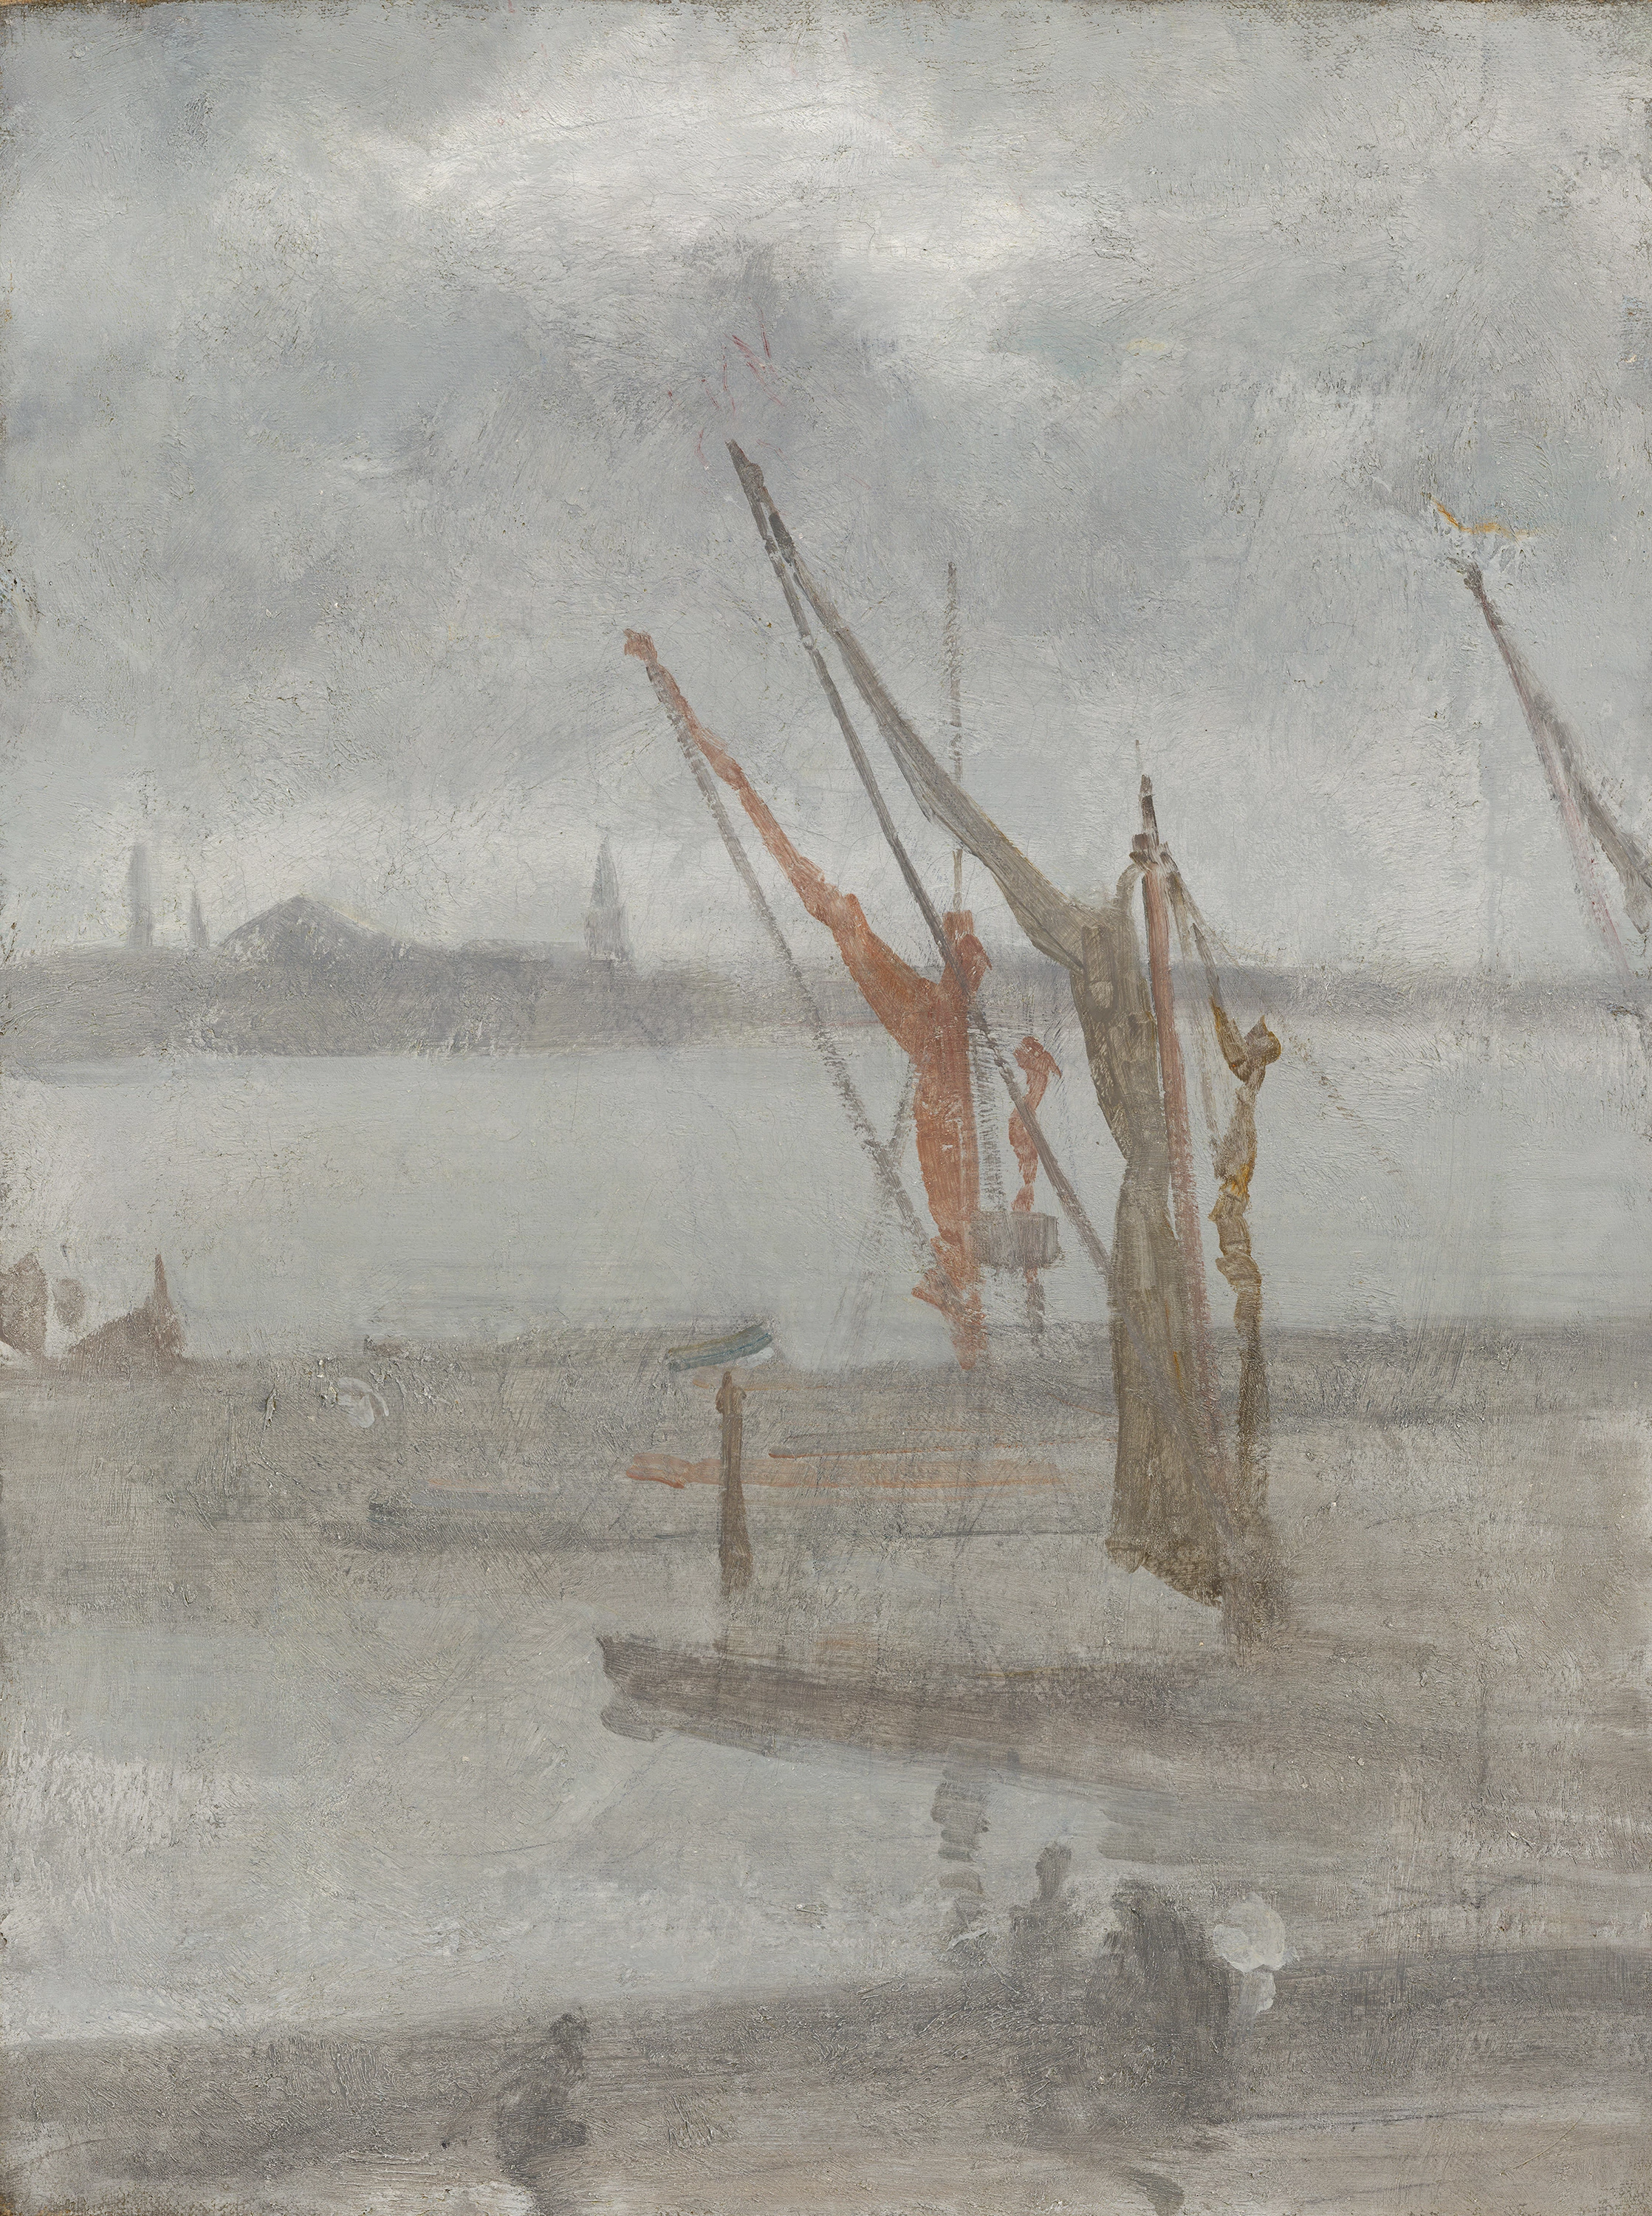 Grey and Silver: Chelsea Wharf, James McNeill Whistler